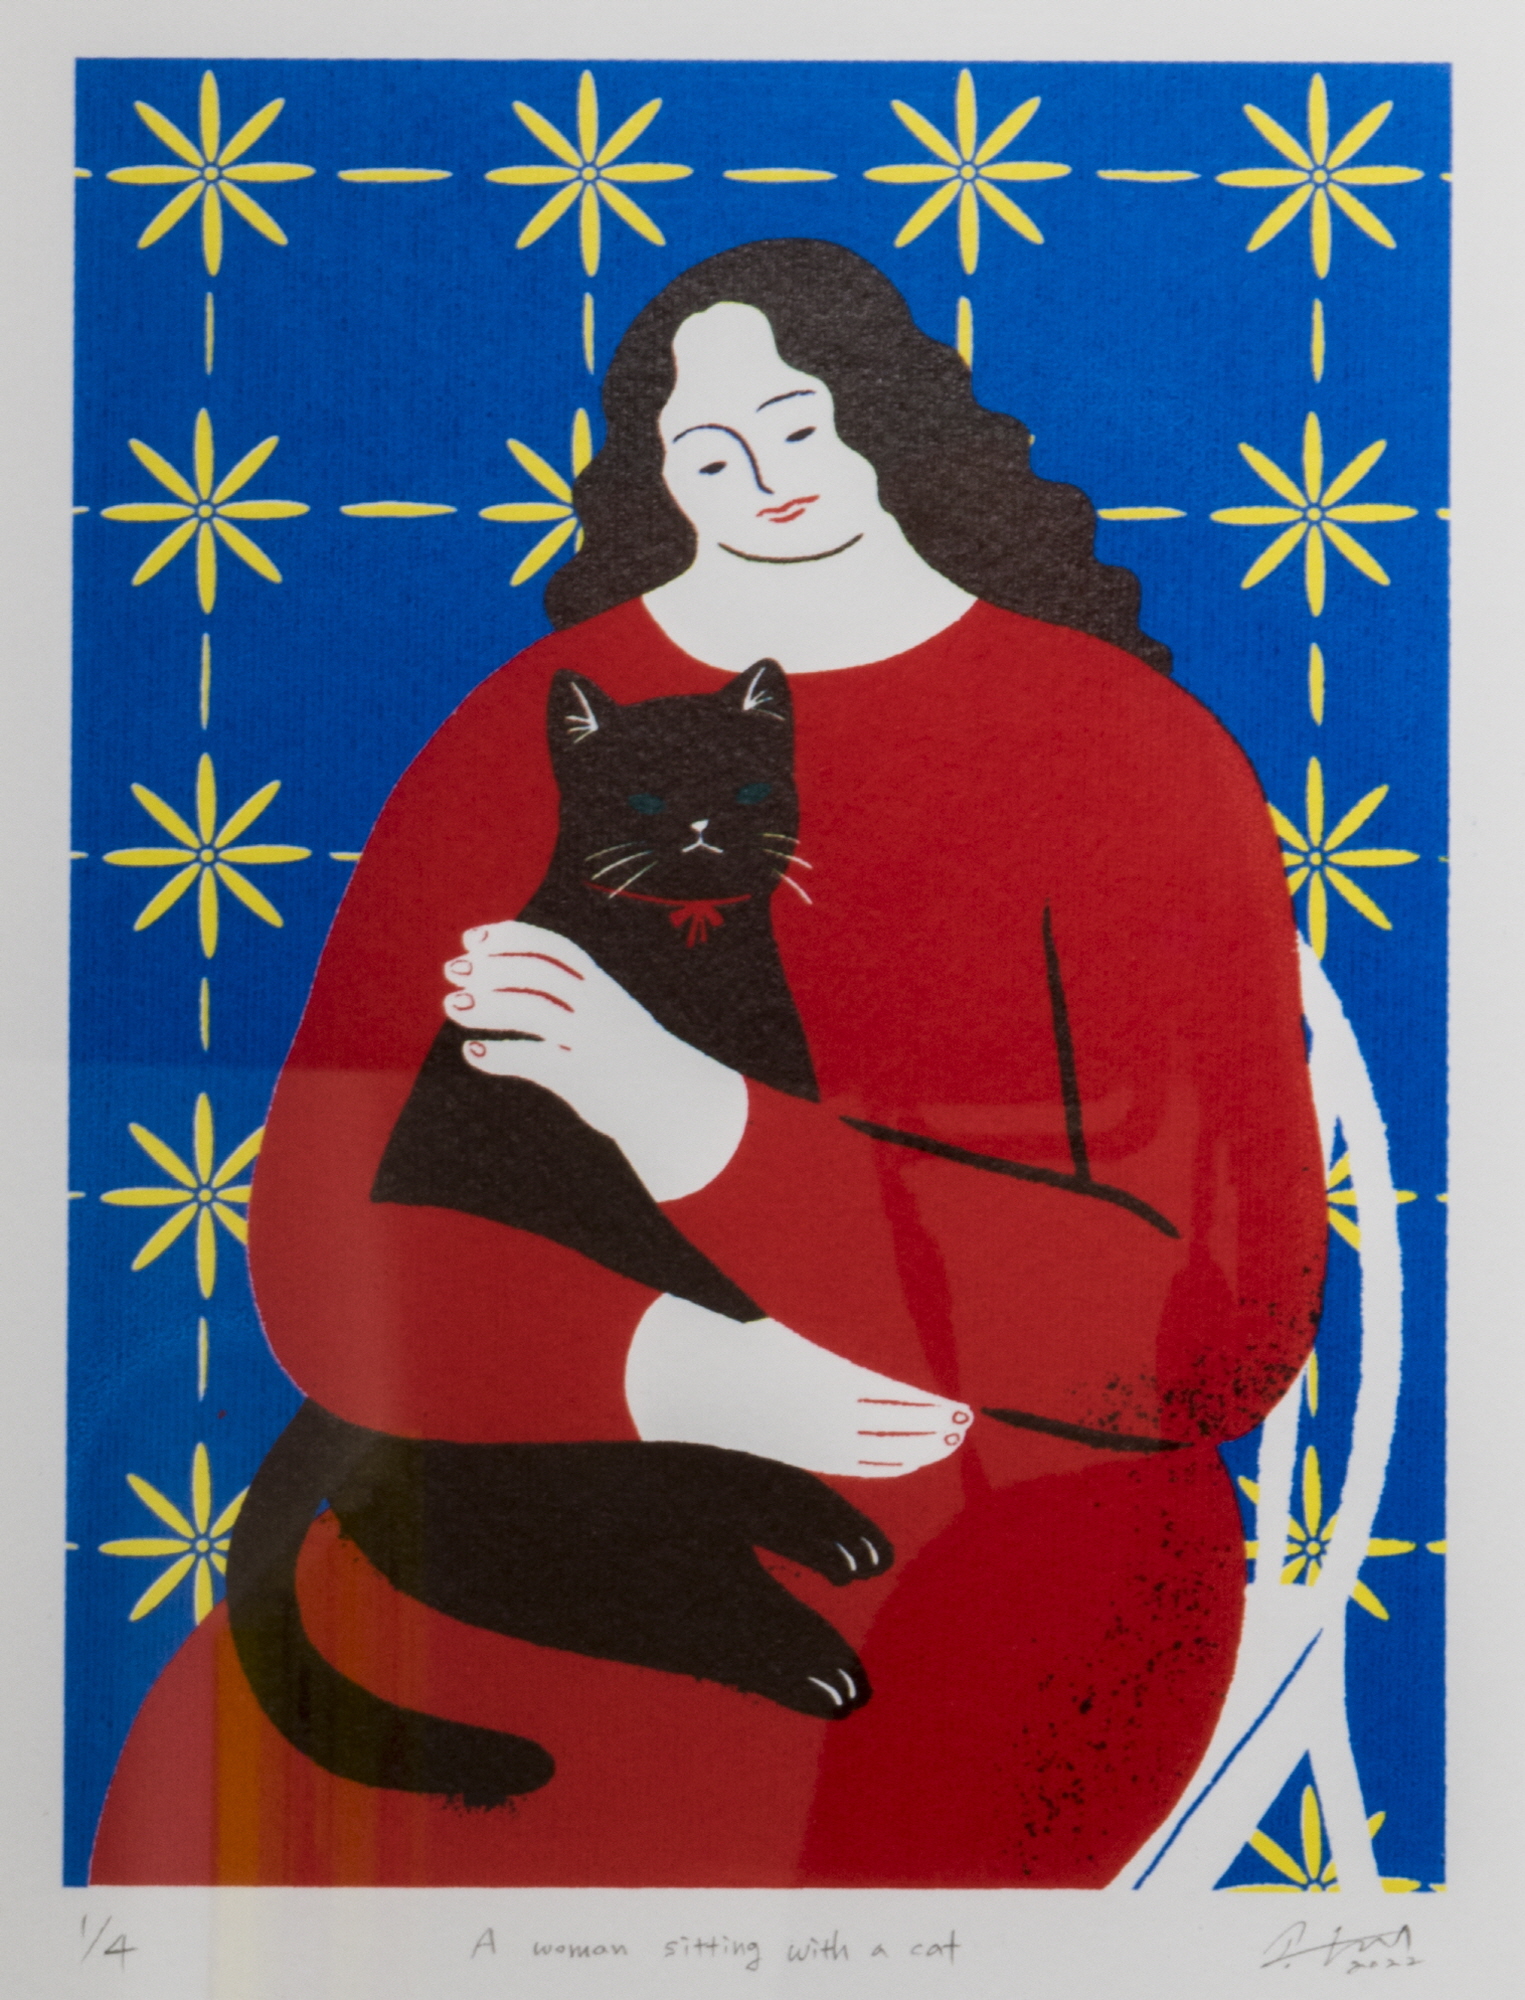 A woman sitting with a cat, silkscreen on paper, 26x20cm, 2022